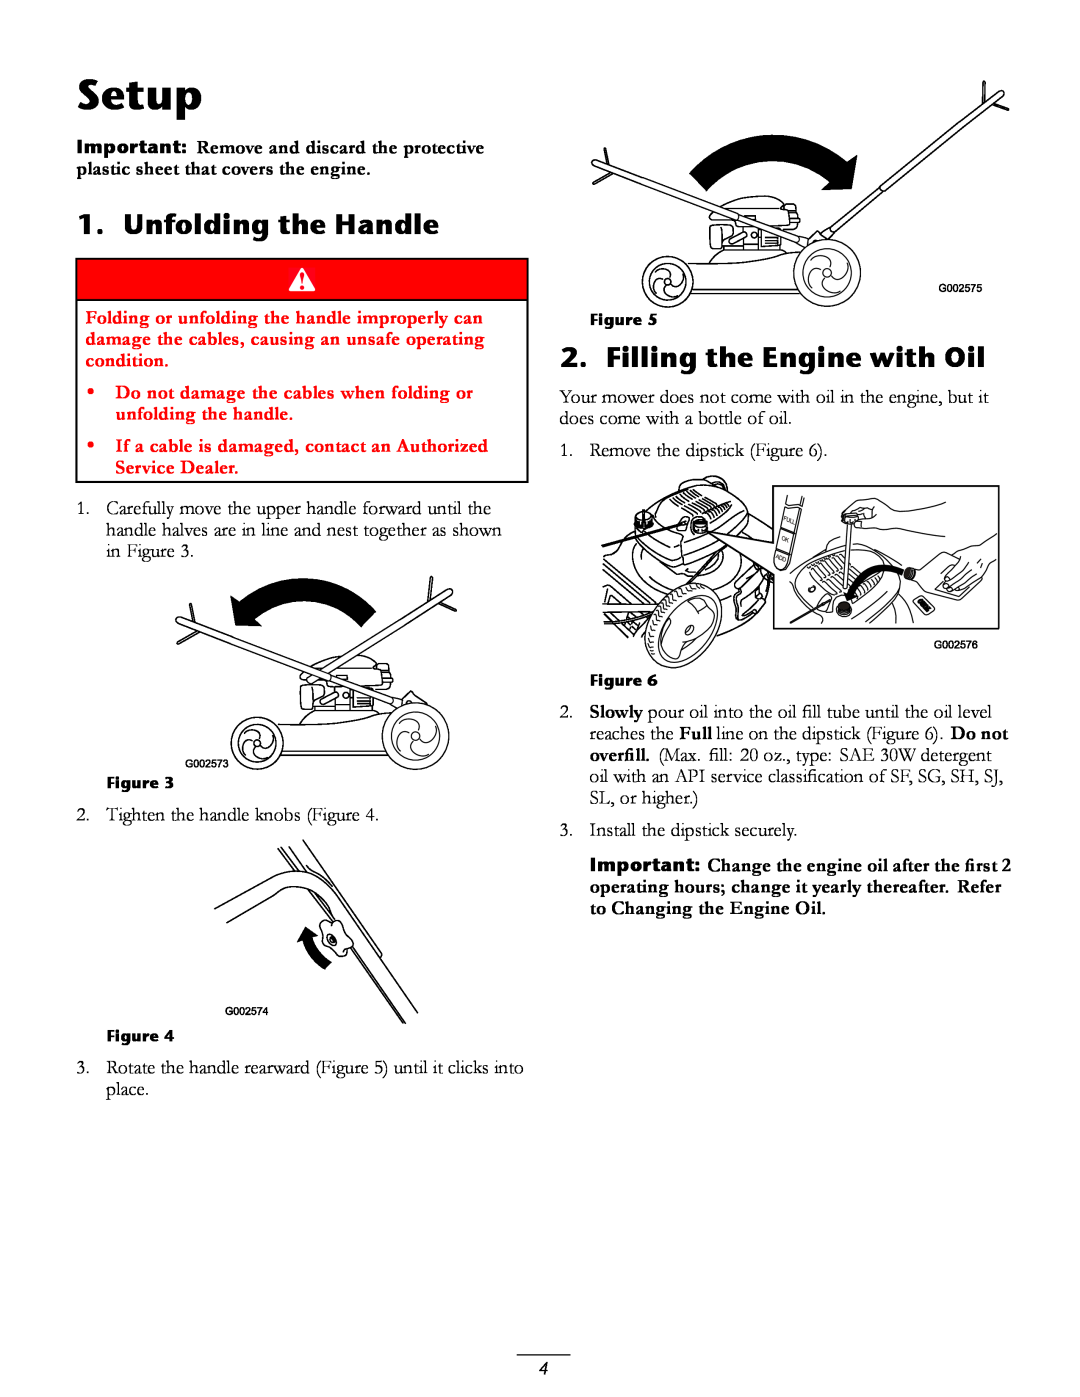 Toro 20016 owner manual Setup, Unfolding the Handle, Filling the Engine with Oil 